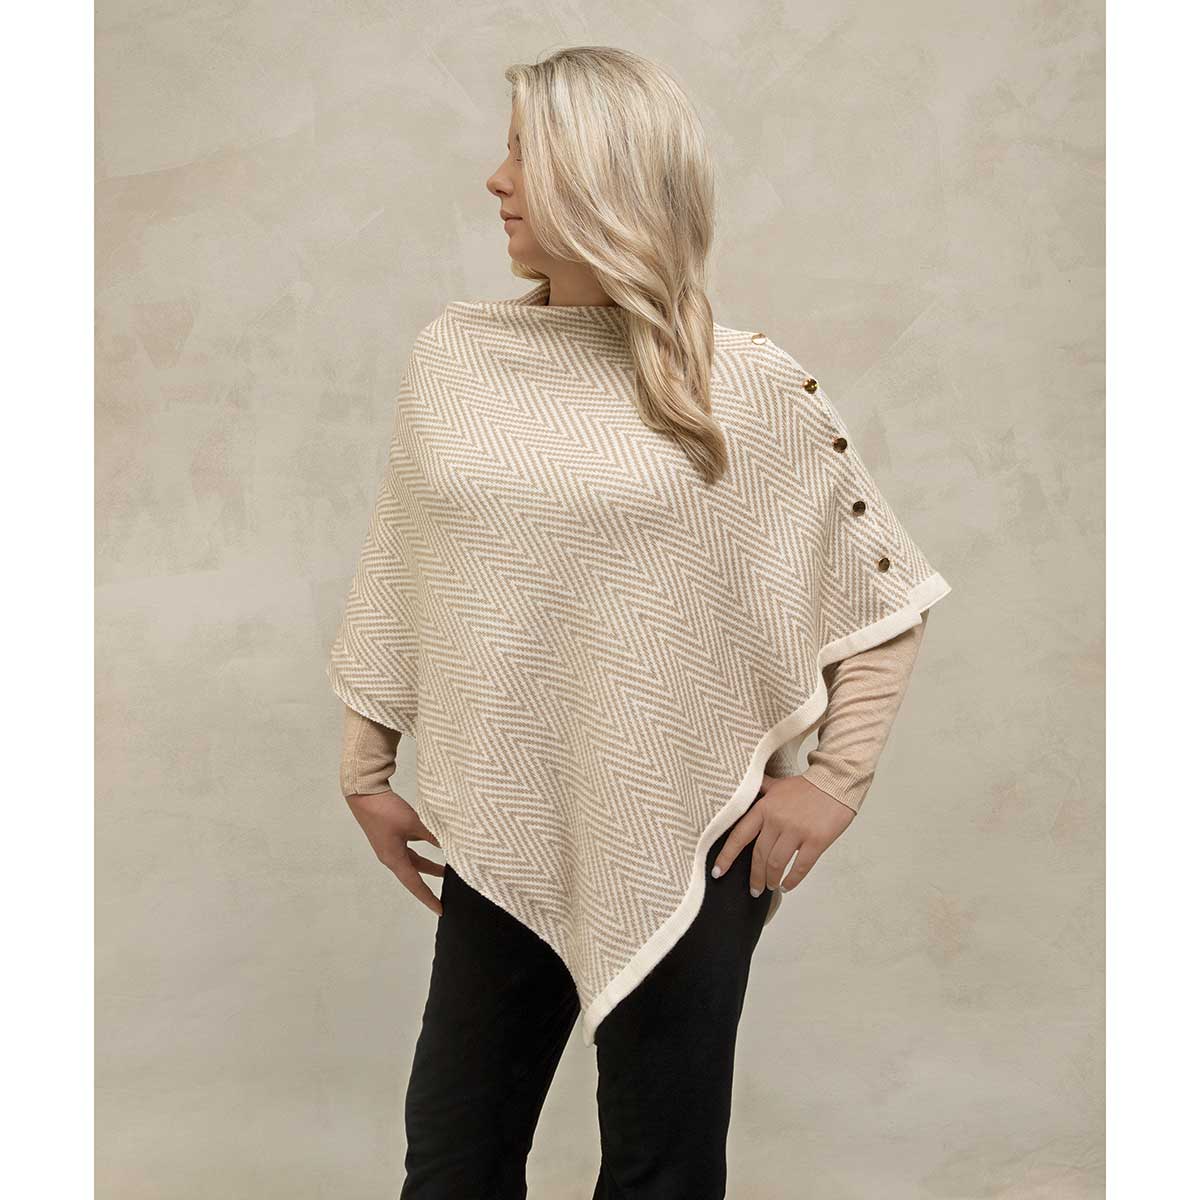 TAN ZIG ZAG PONCHO WITH BUTTONS 30"X34" (ONE SIZE FITS MOST)